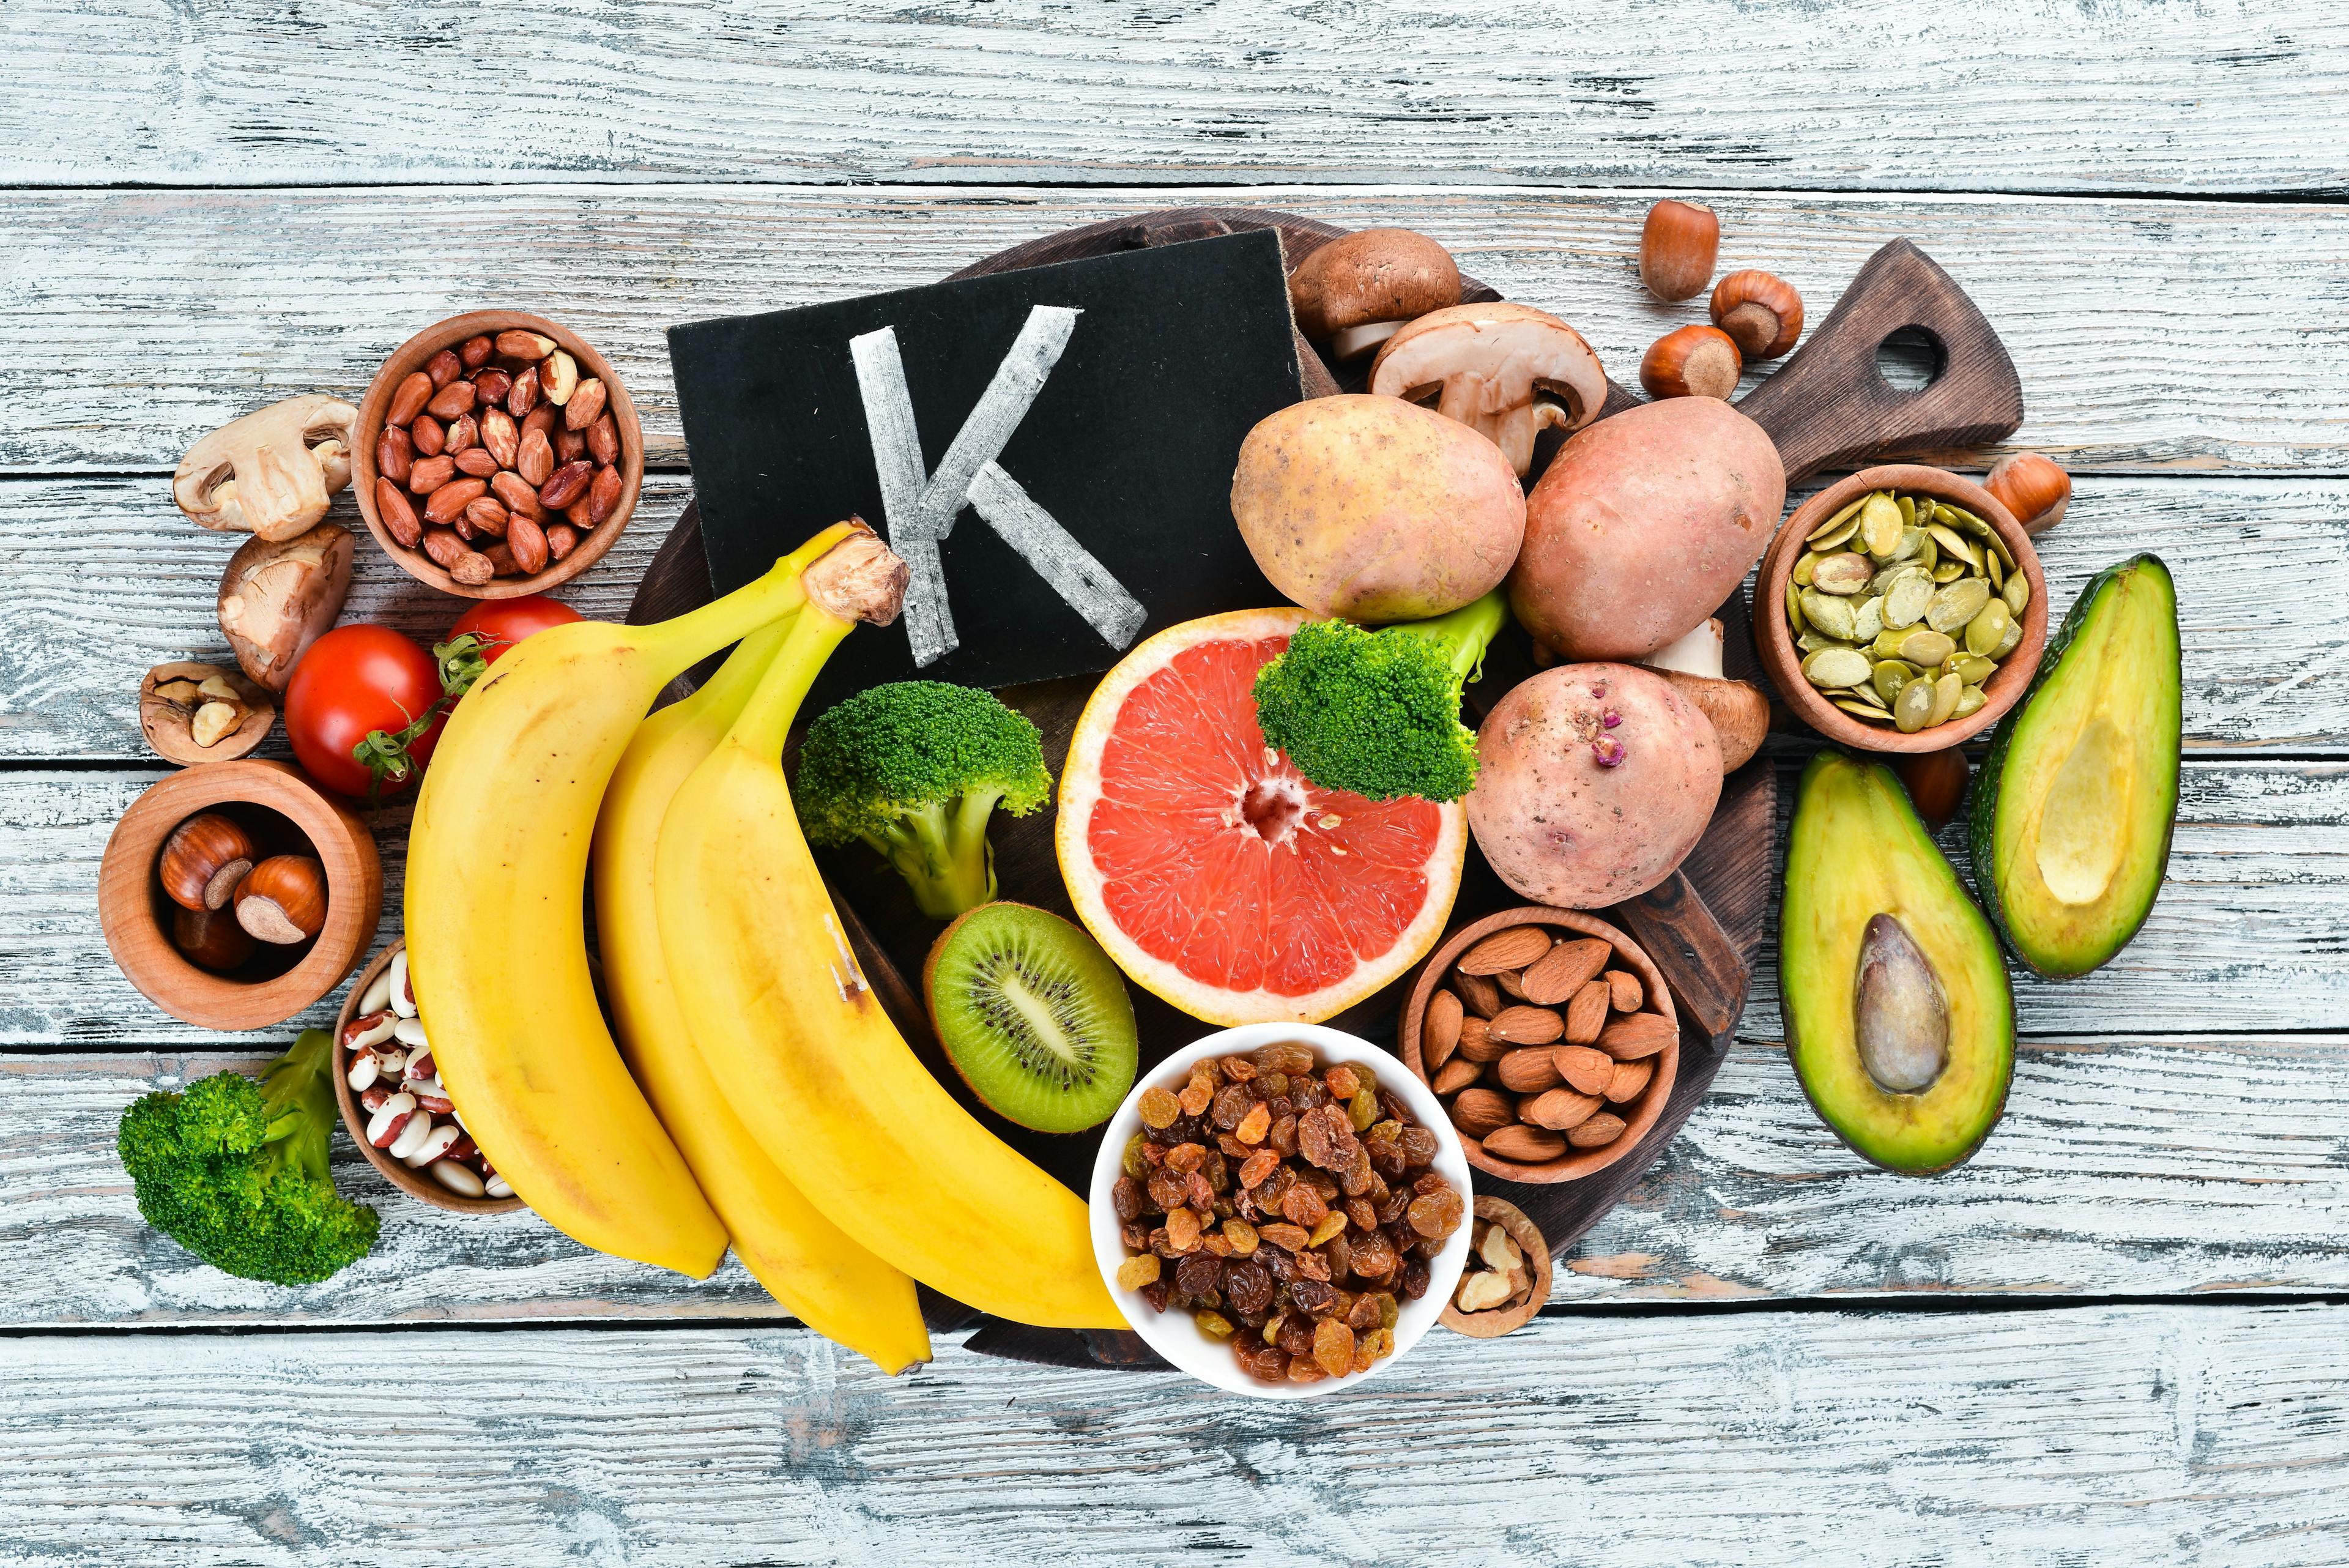 Foods containing natural potassium. K: Potatoes, mushrooms, banana, tomatoes, nuts, beans, broccoli, avocados. Top view. On a white wooden background. | Image Credit: © Yaruniv-Studio